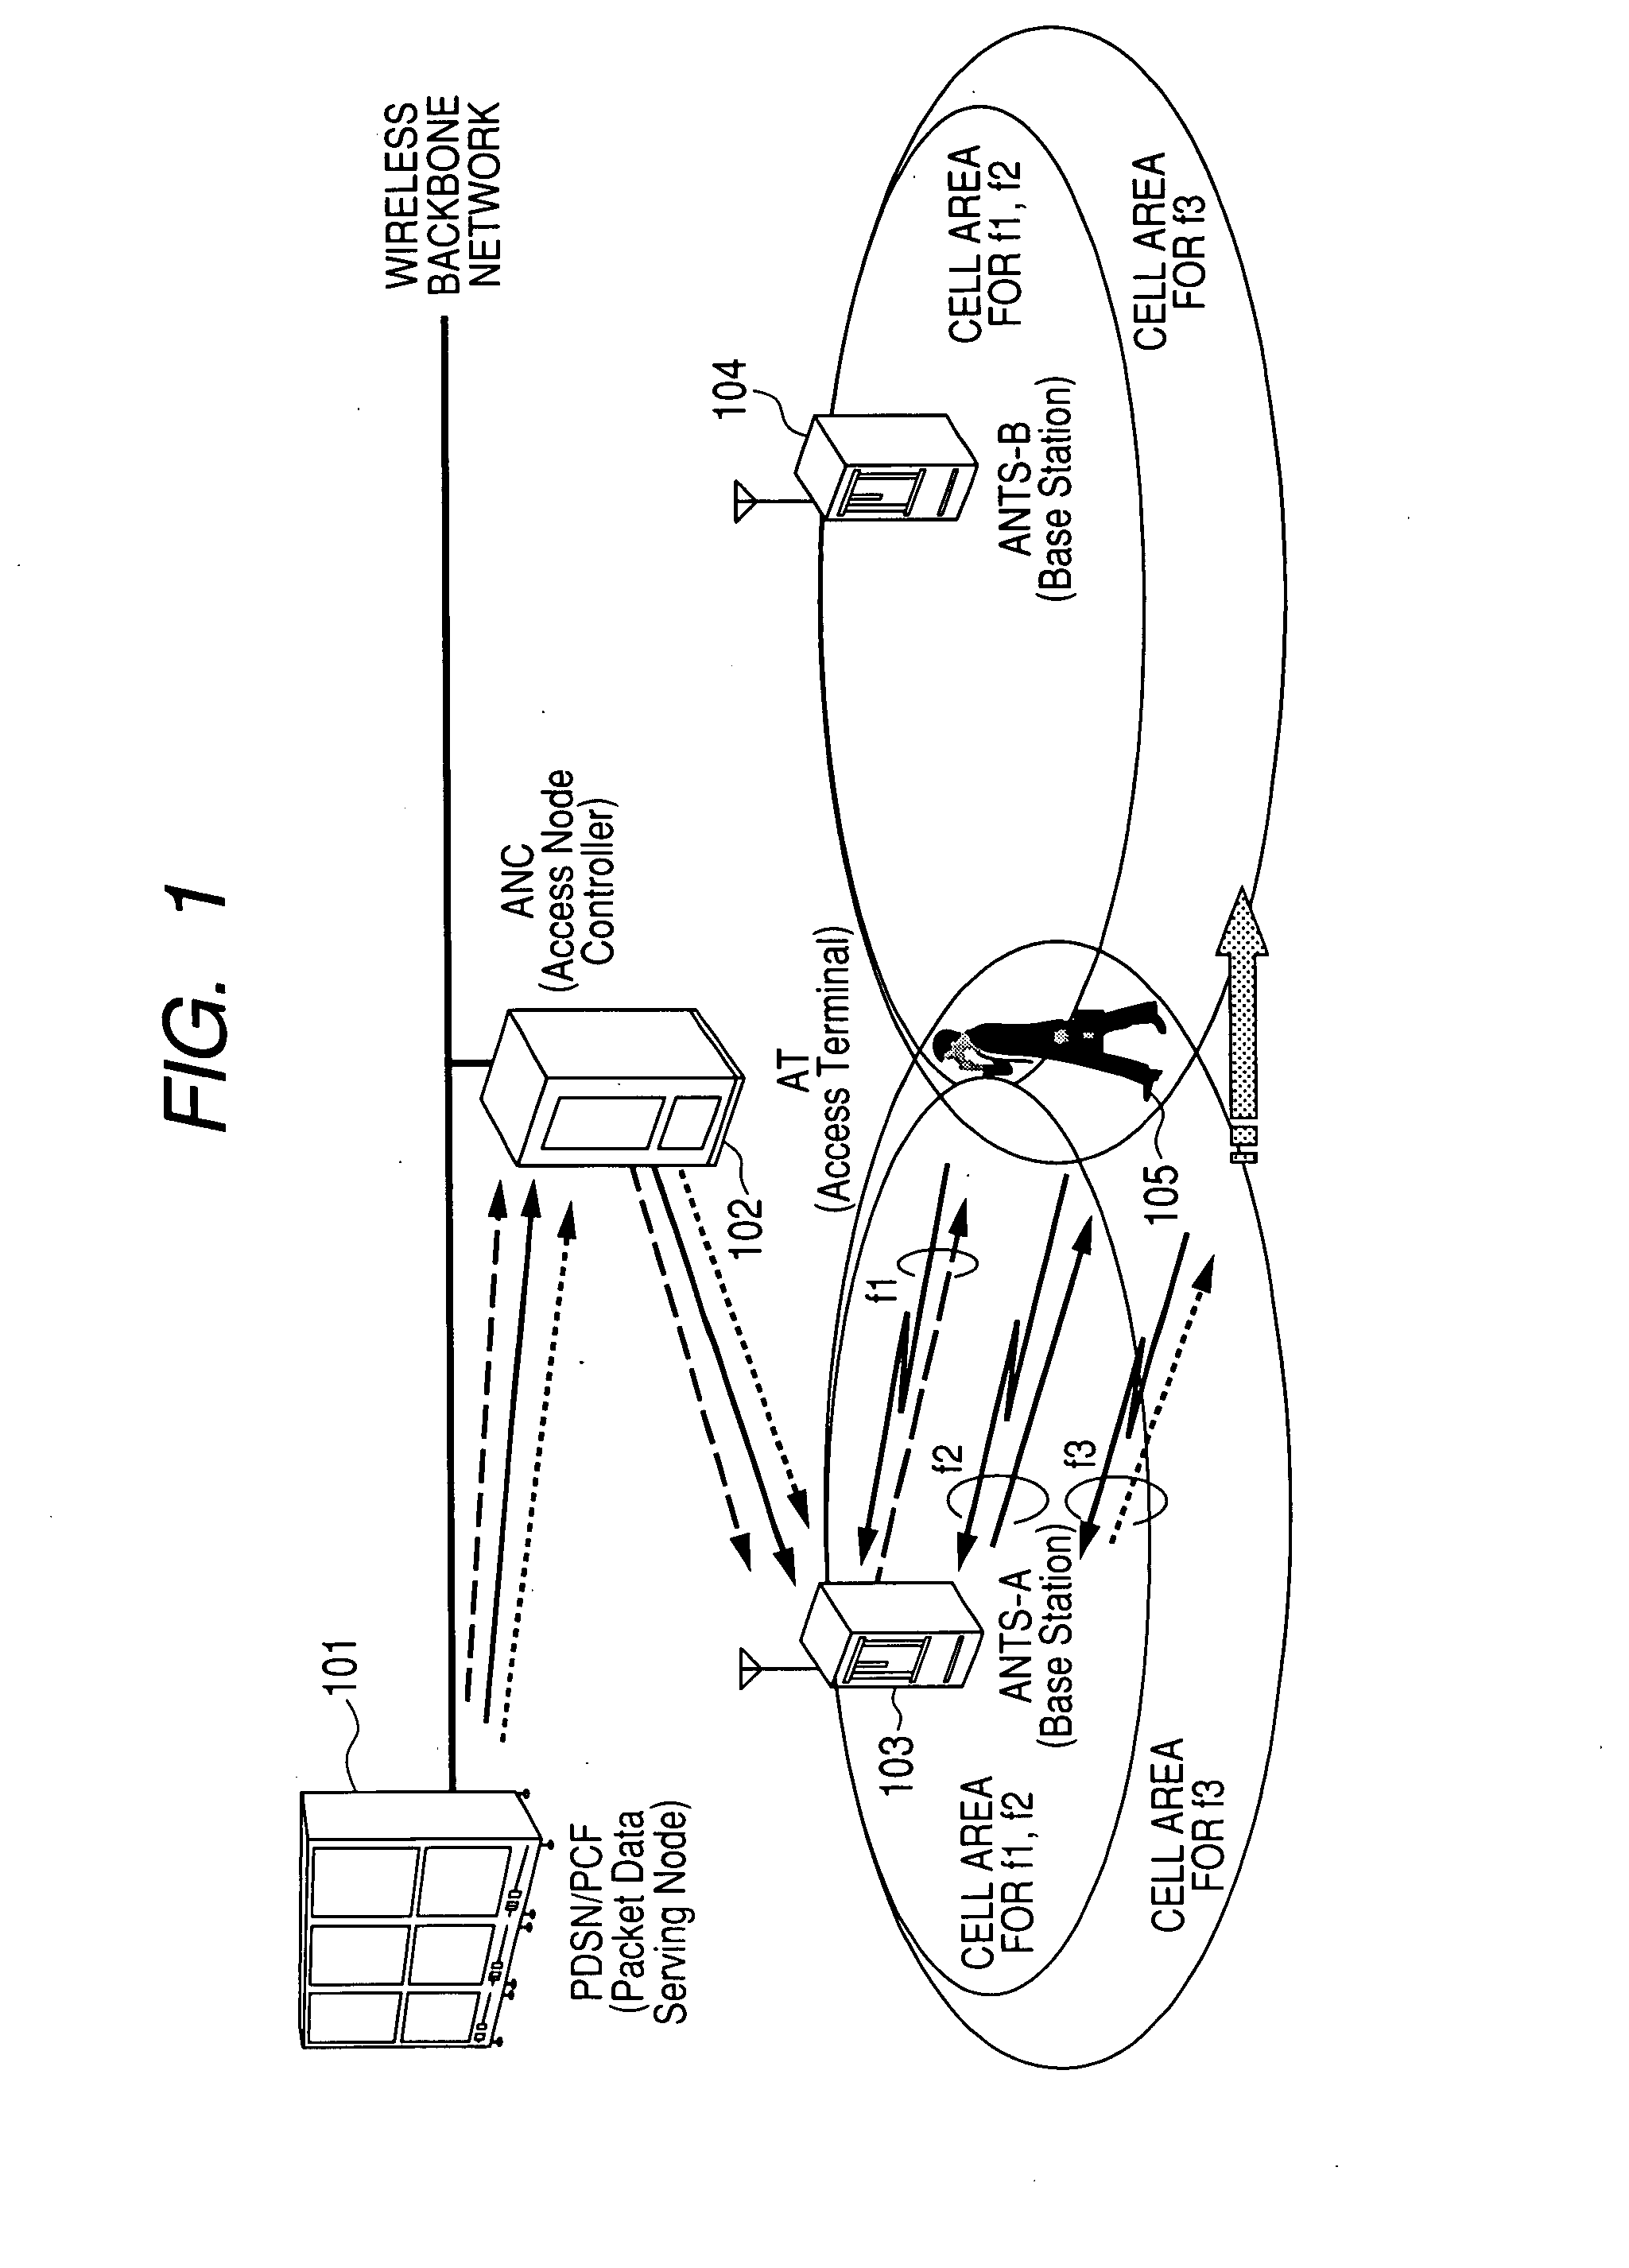 Handoff method for communication system using multiple wireless resources